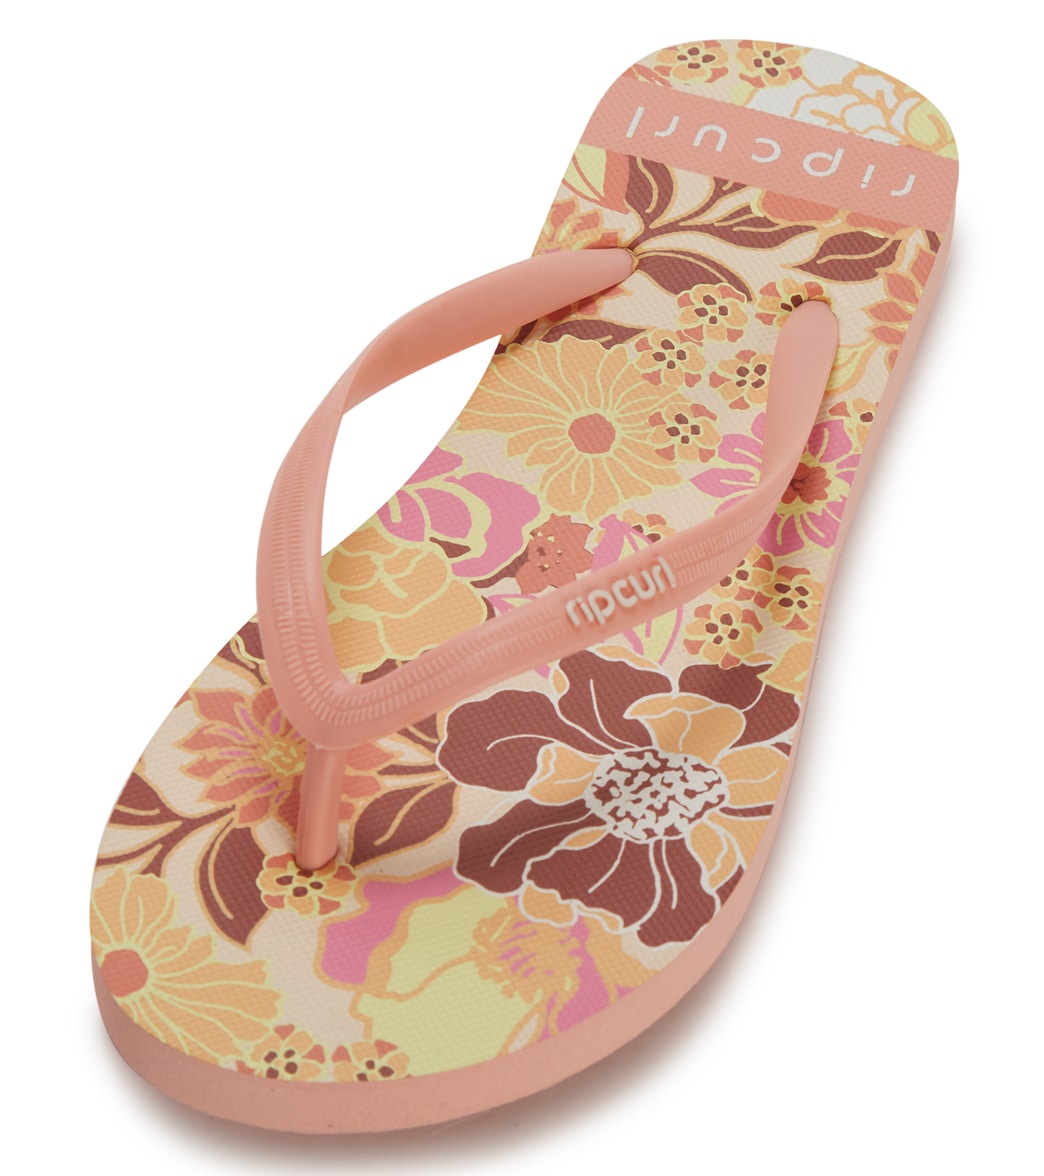 Rip Curl girls' wave shapers floral girl sandals - peach 11 - swimoutlet.com